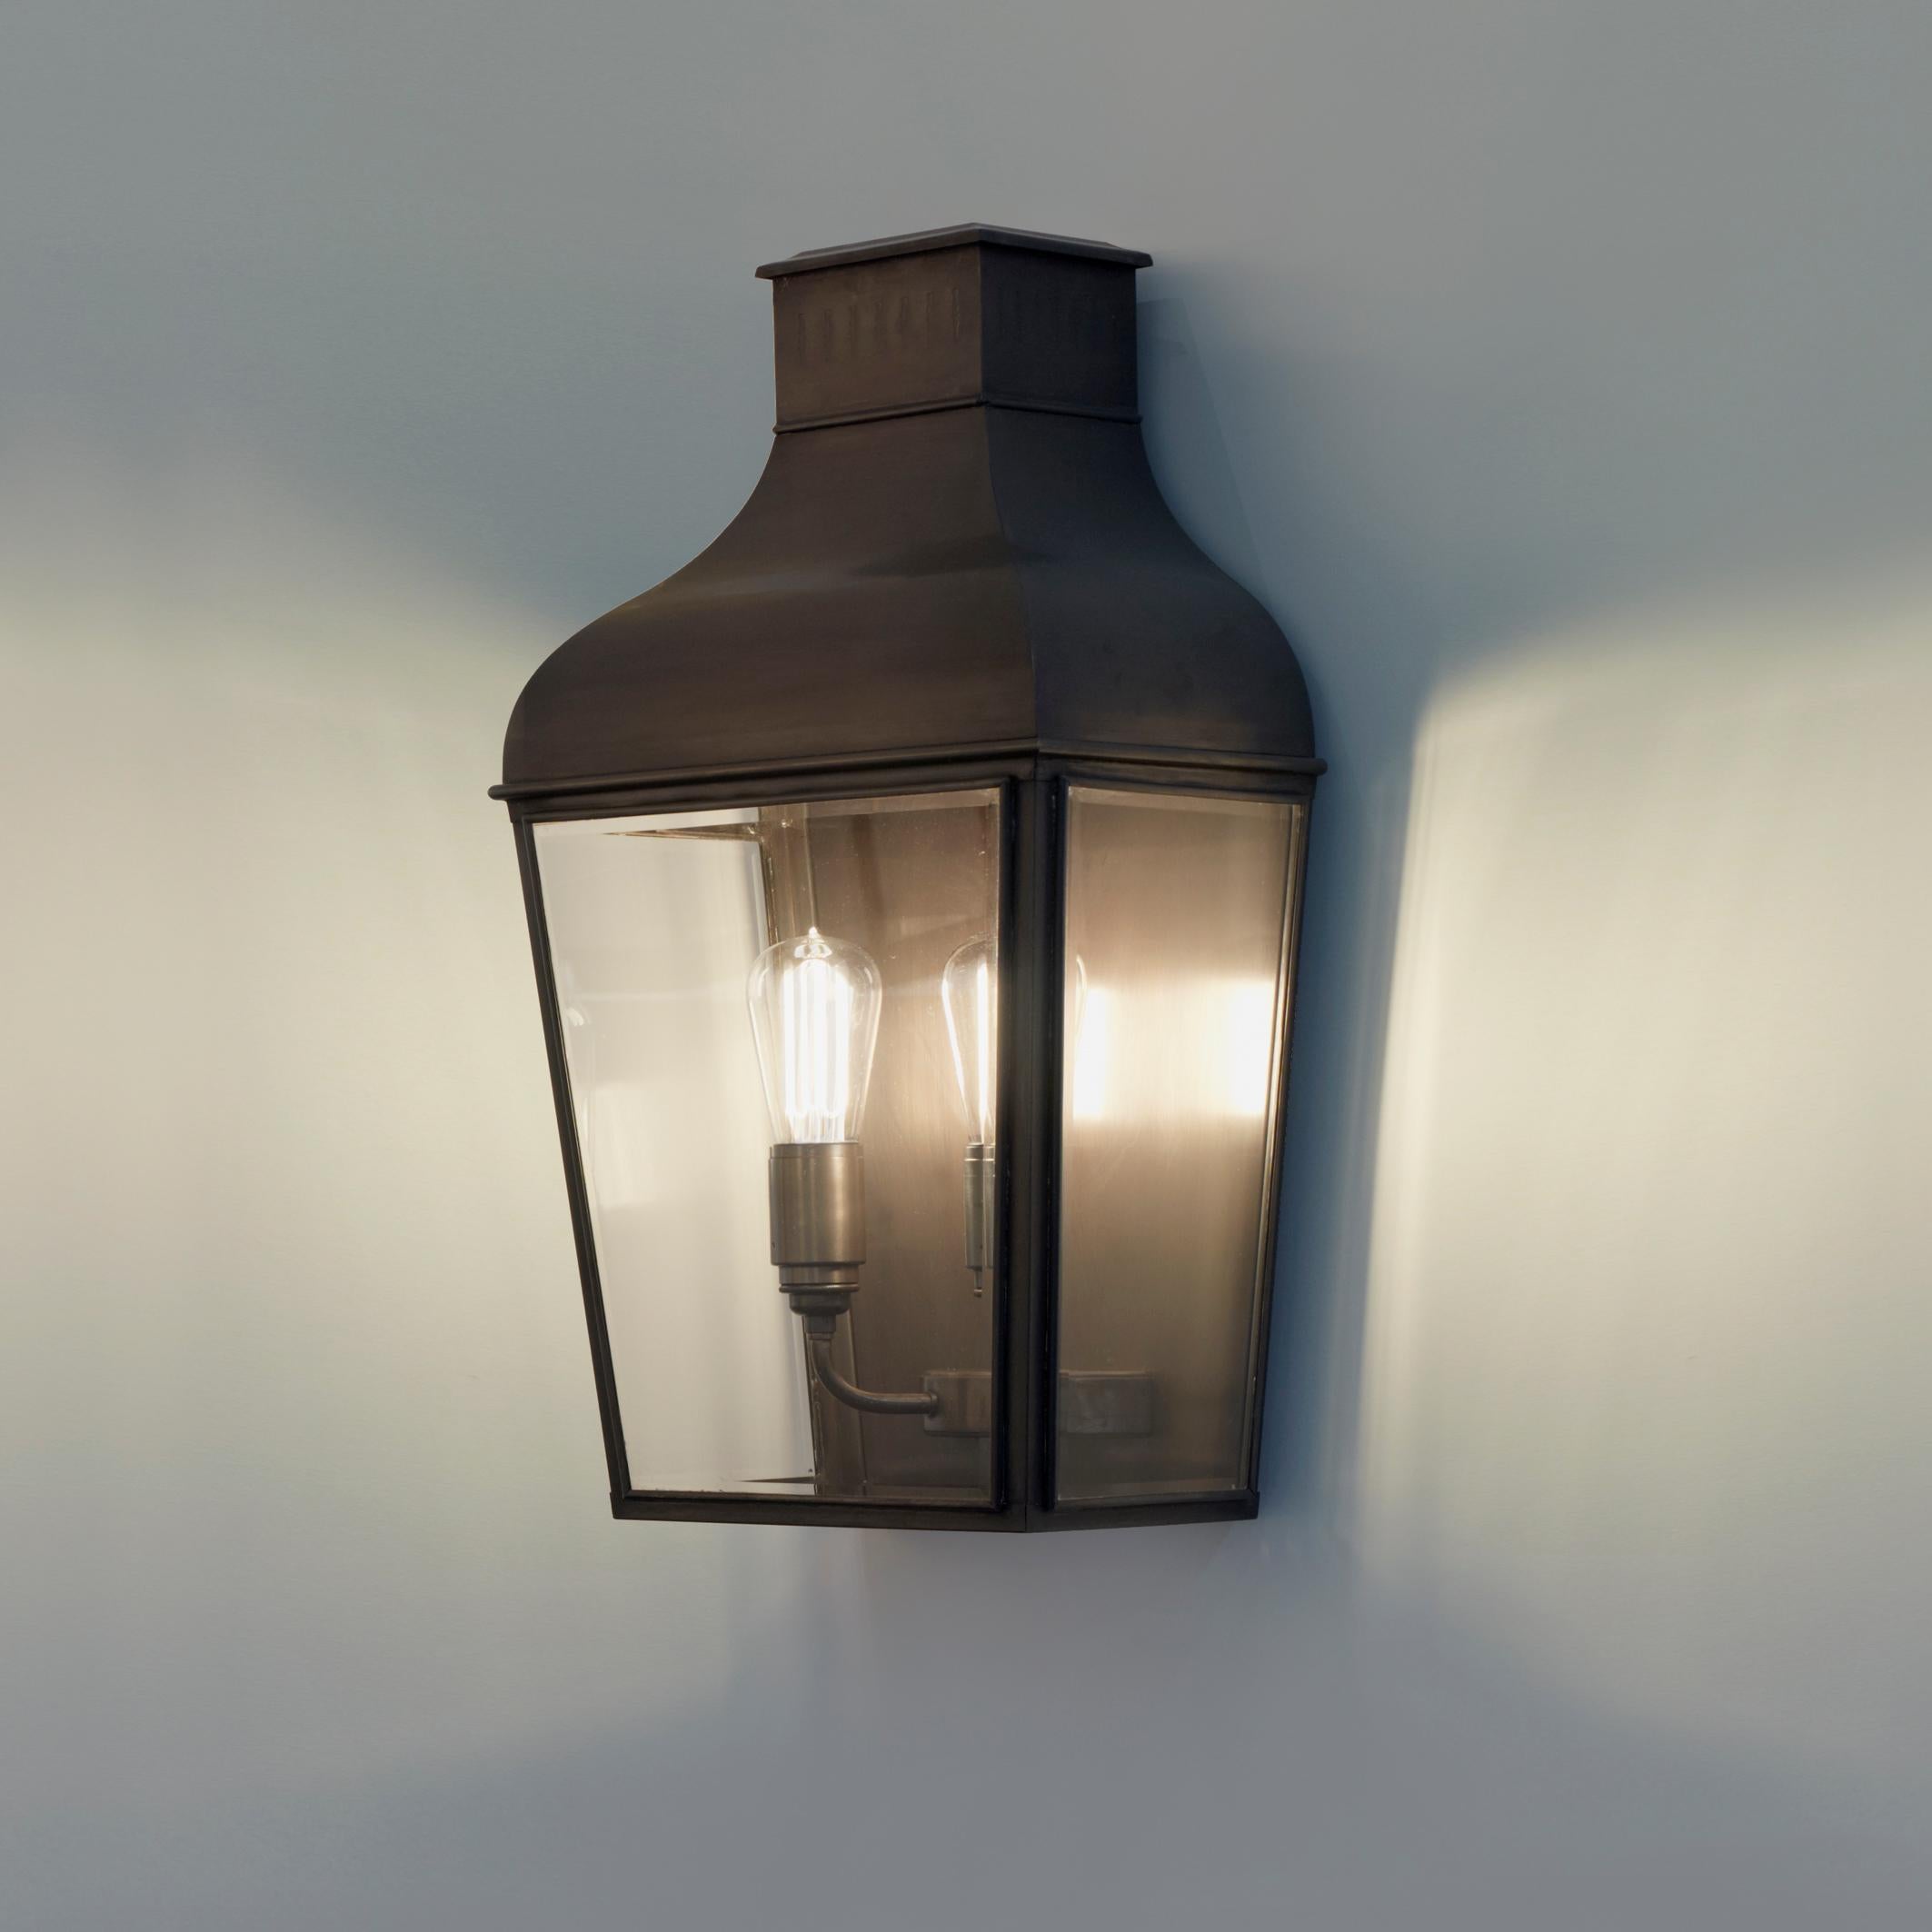 Wall light with pagoda structure in dark bronze with outside fitted clear glass and spring closure. For indoor and outdoor use (IP44).

Caret squirrel cage lamp 230V E27 2 x 7,7W 2300K. Main power 230V 50Hz.